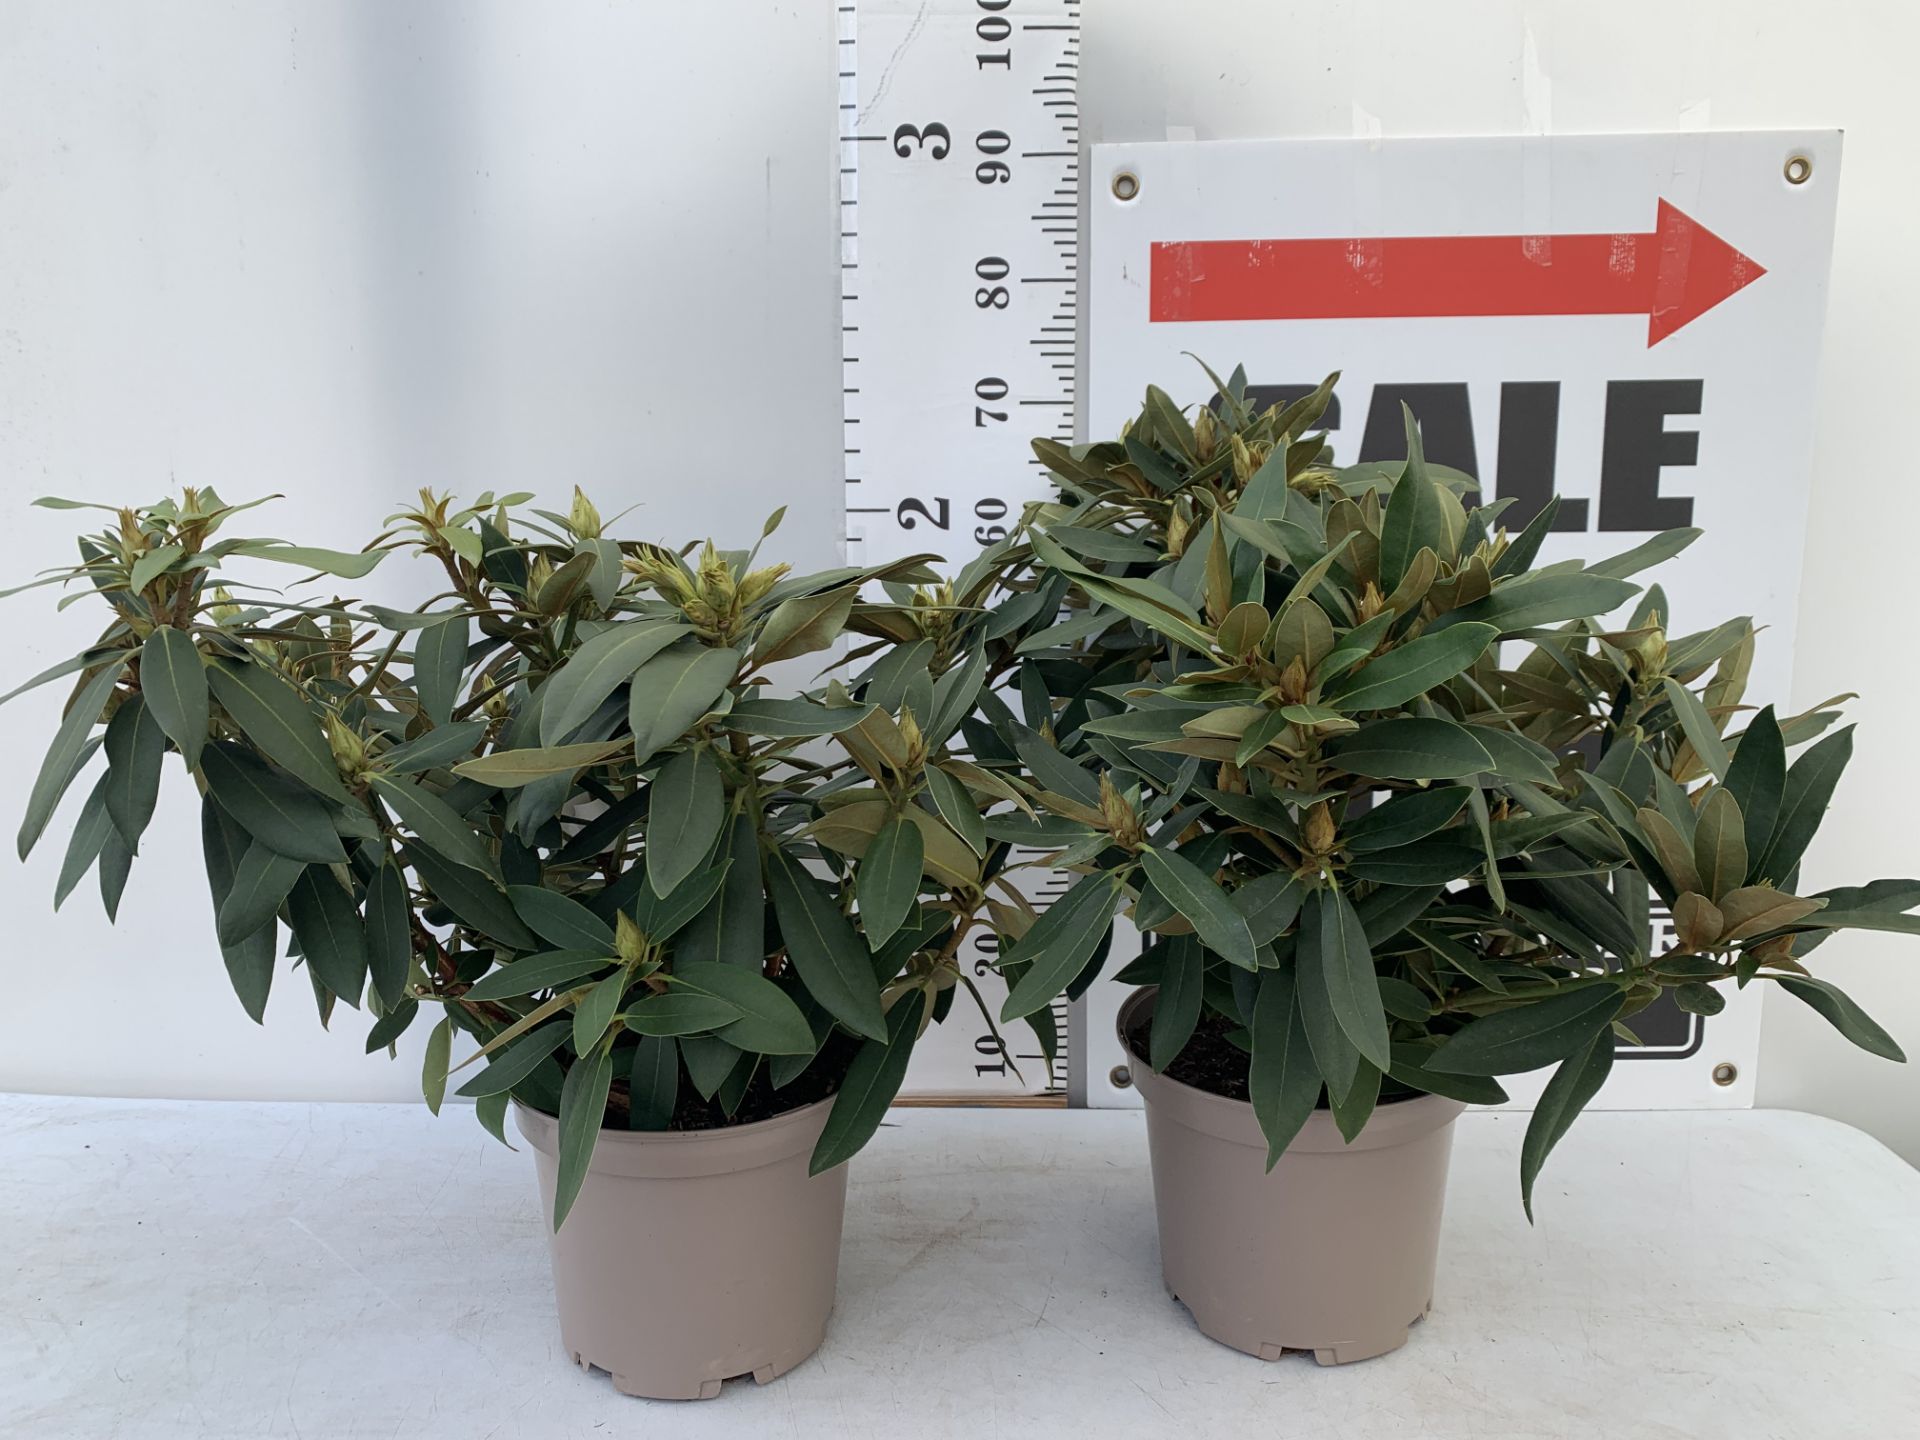 TWO RHODODENDRONS TARAGONA RED IN 7.5 LTR POTS APPROX 70CM IN HEIGHT PLUS VAT TO BE SOLD FOR THE TWO